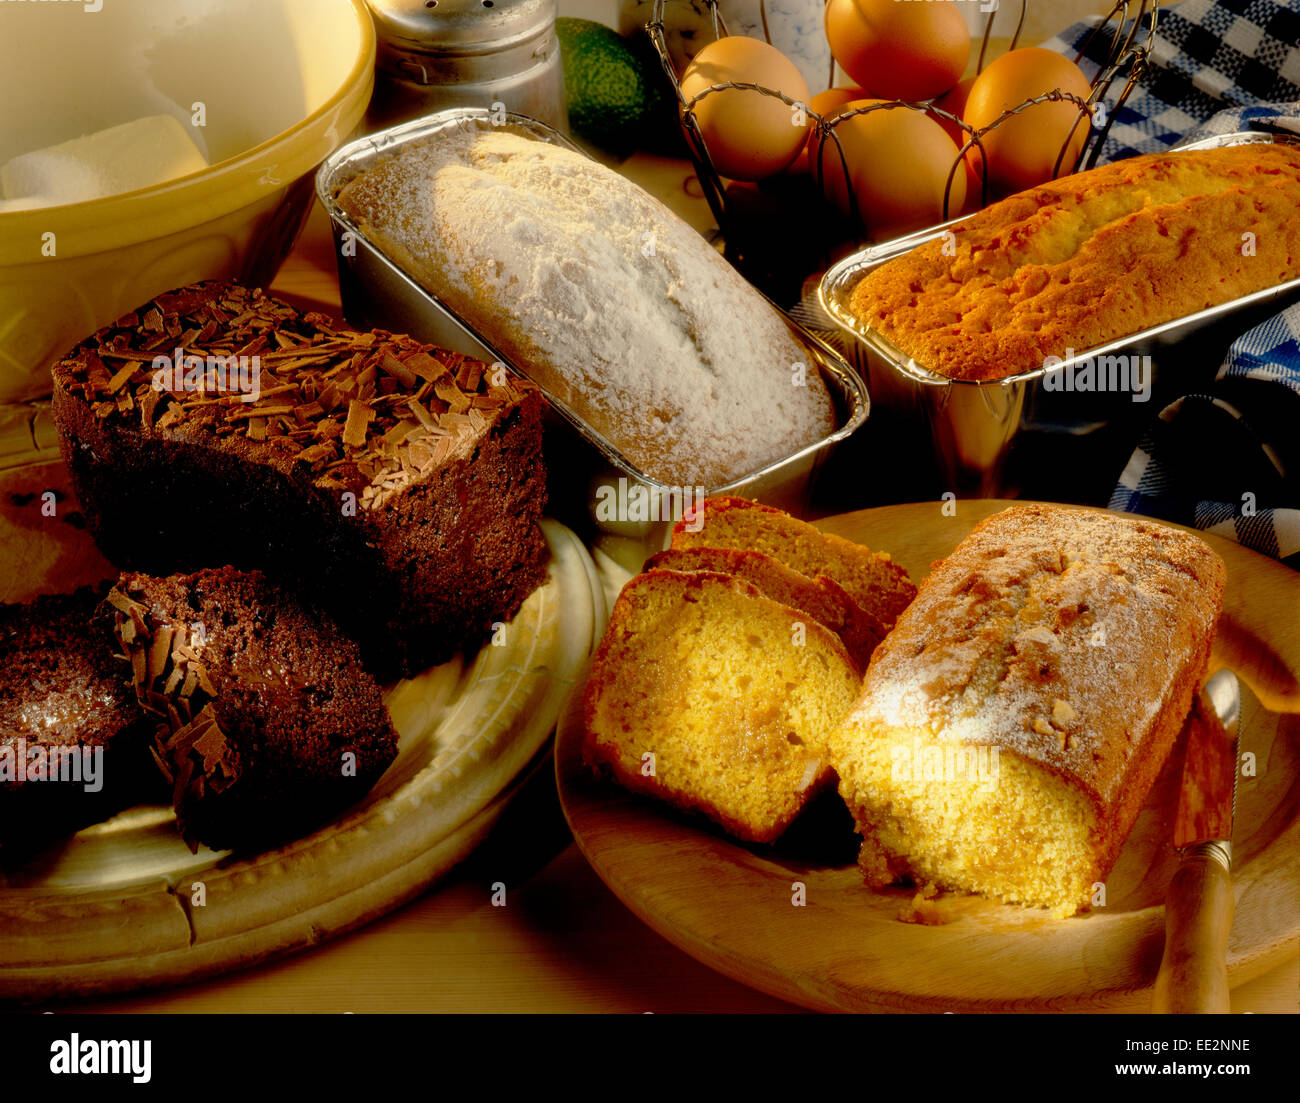 loaf cakes Stock Photo